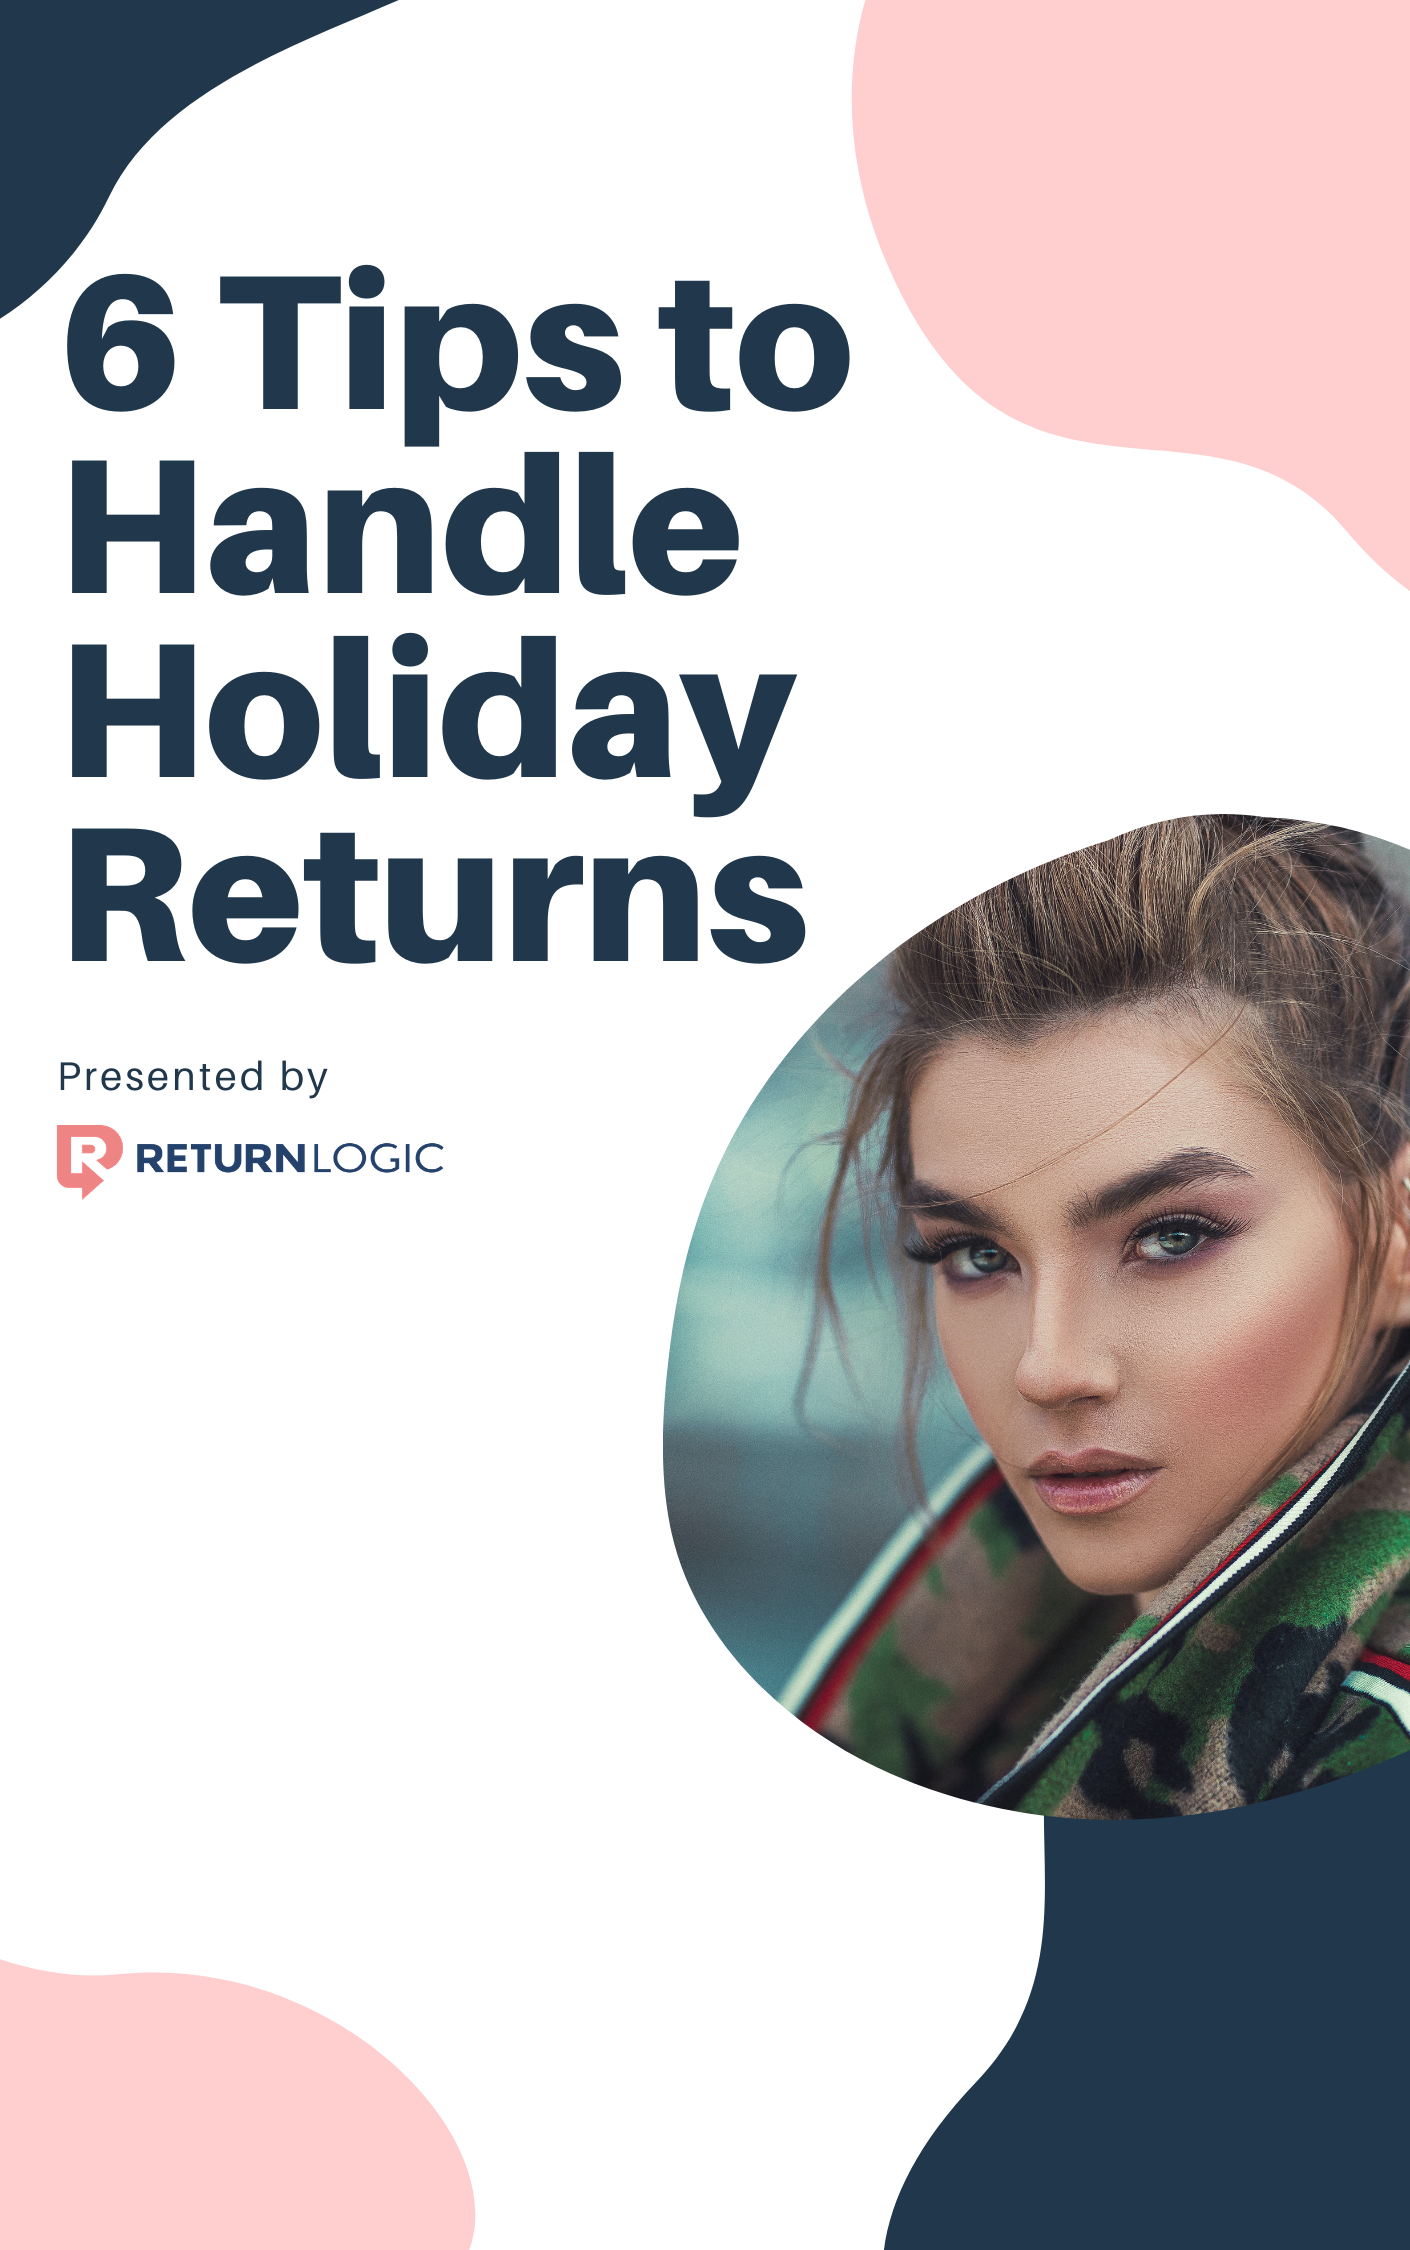 6-tips-to-handle-holiday-returns-vertical-image